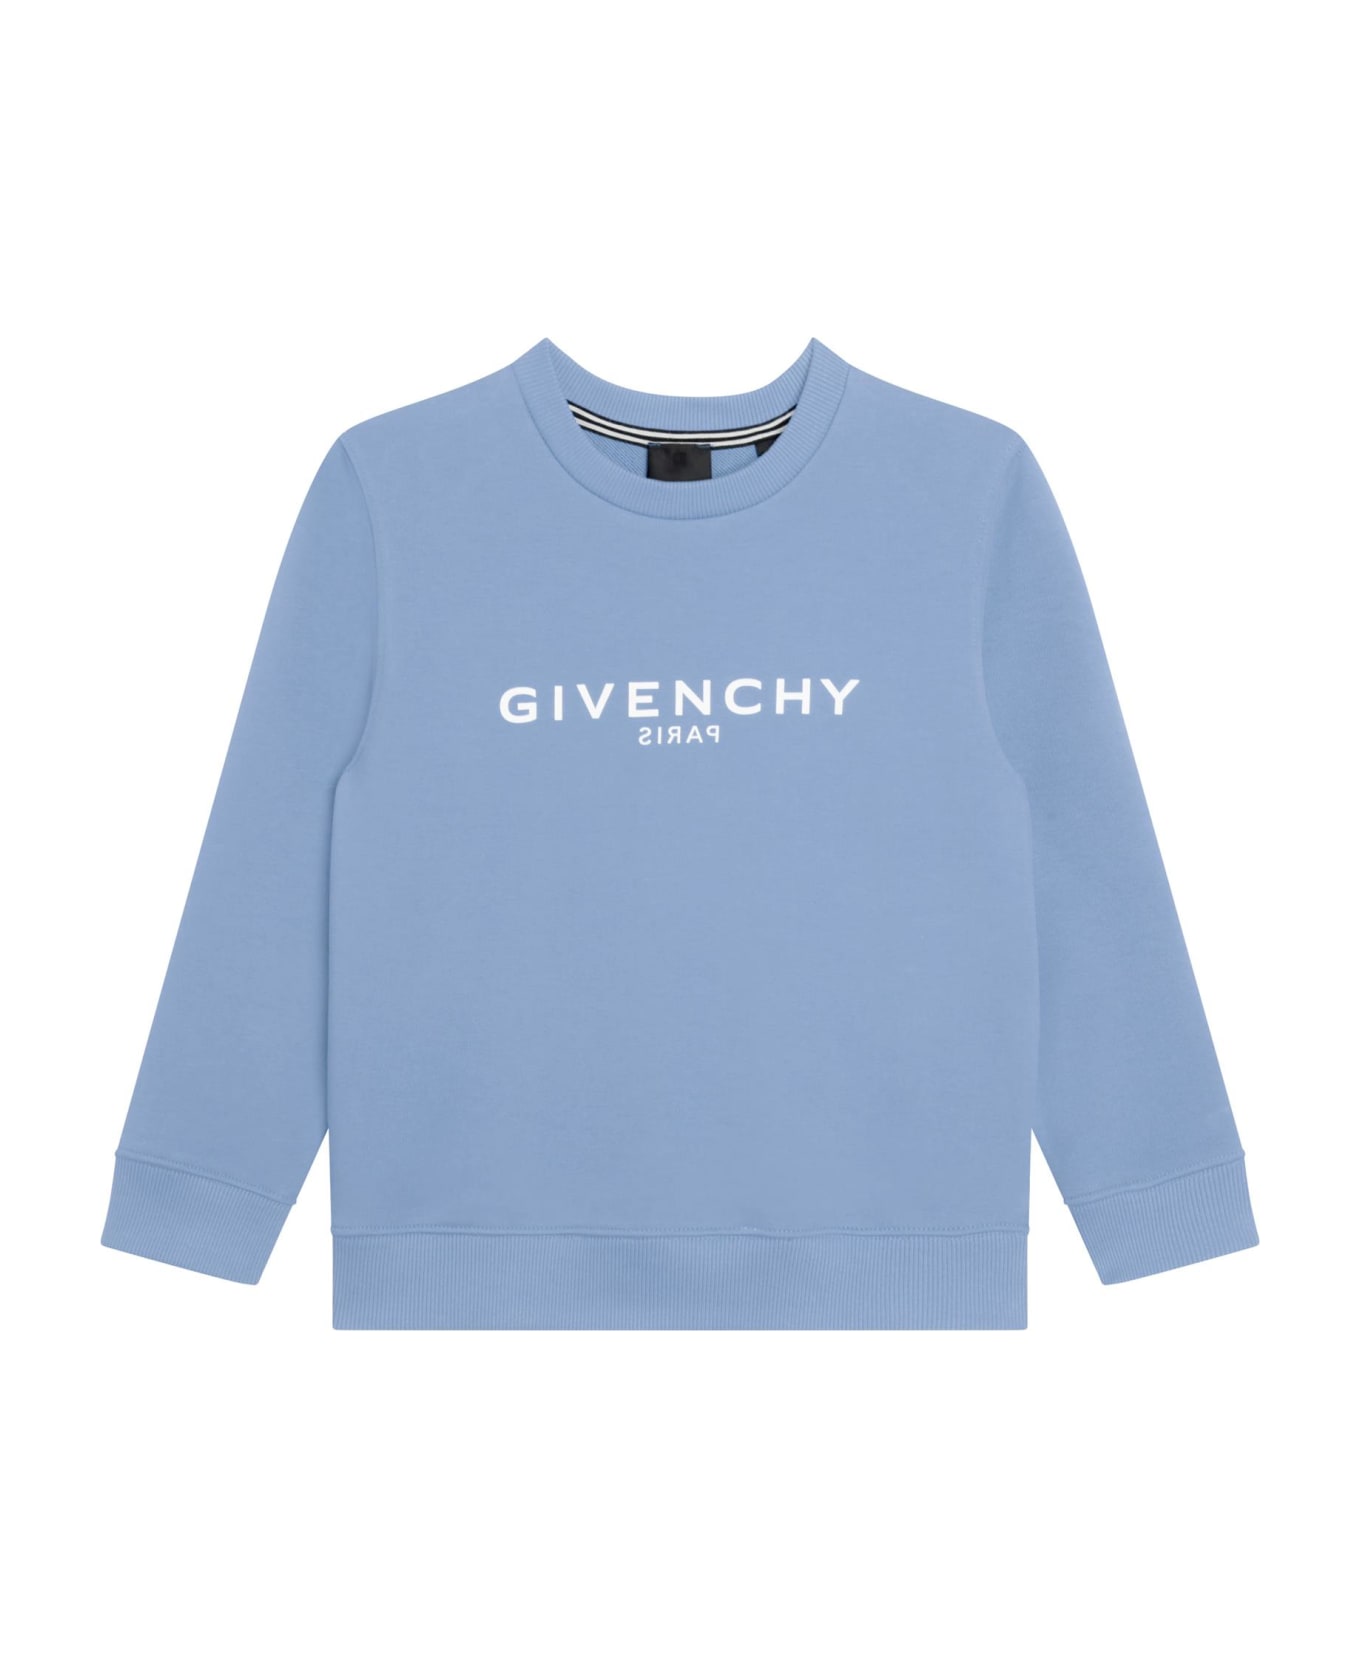 Givenchy Sweatshirt With Print - Light blue